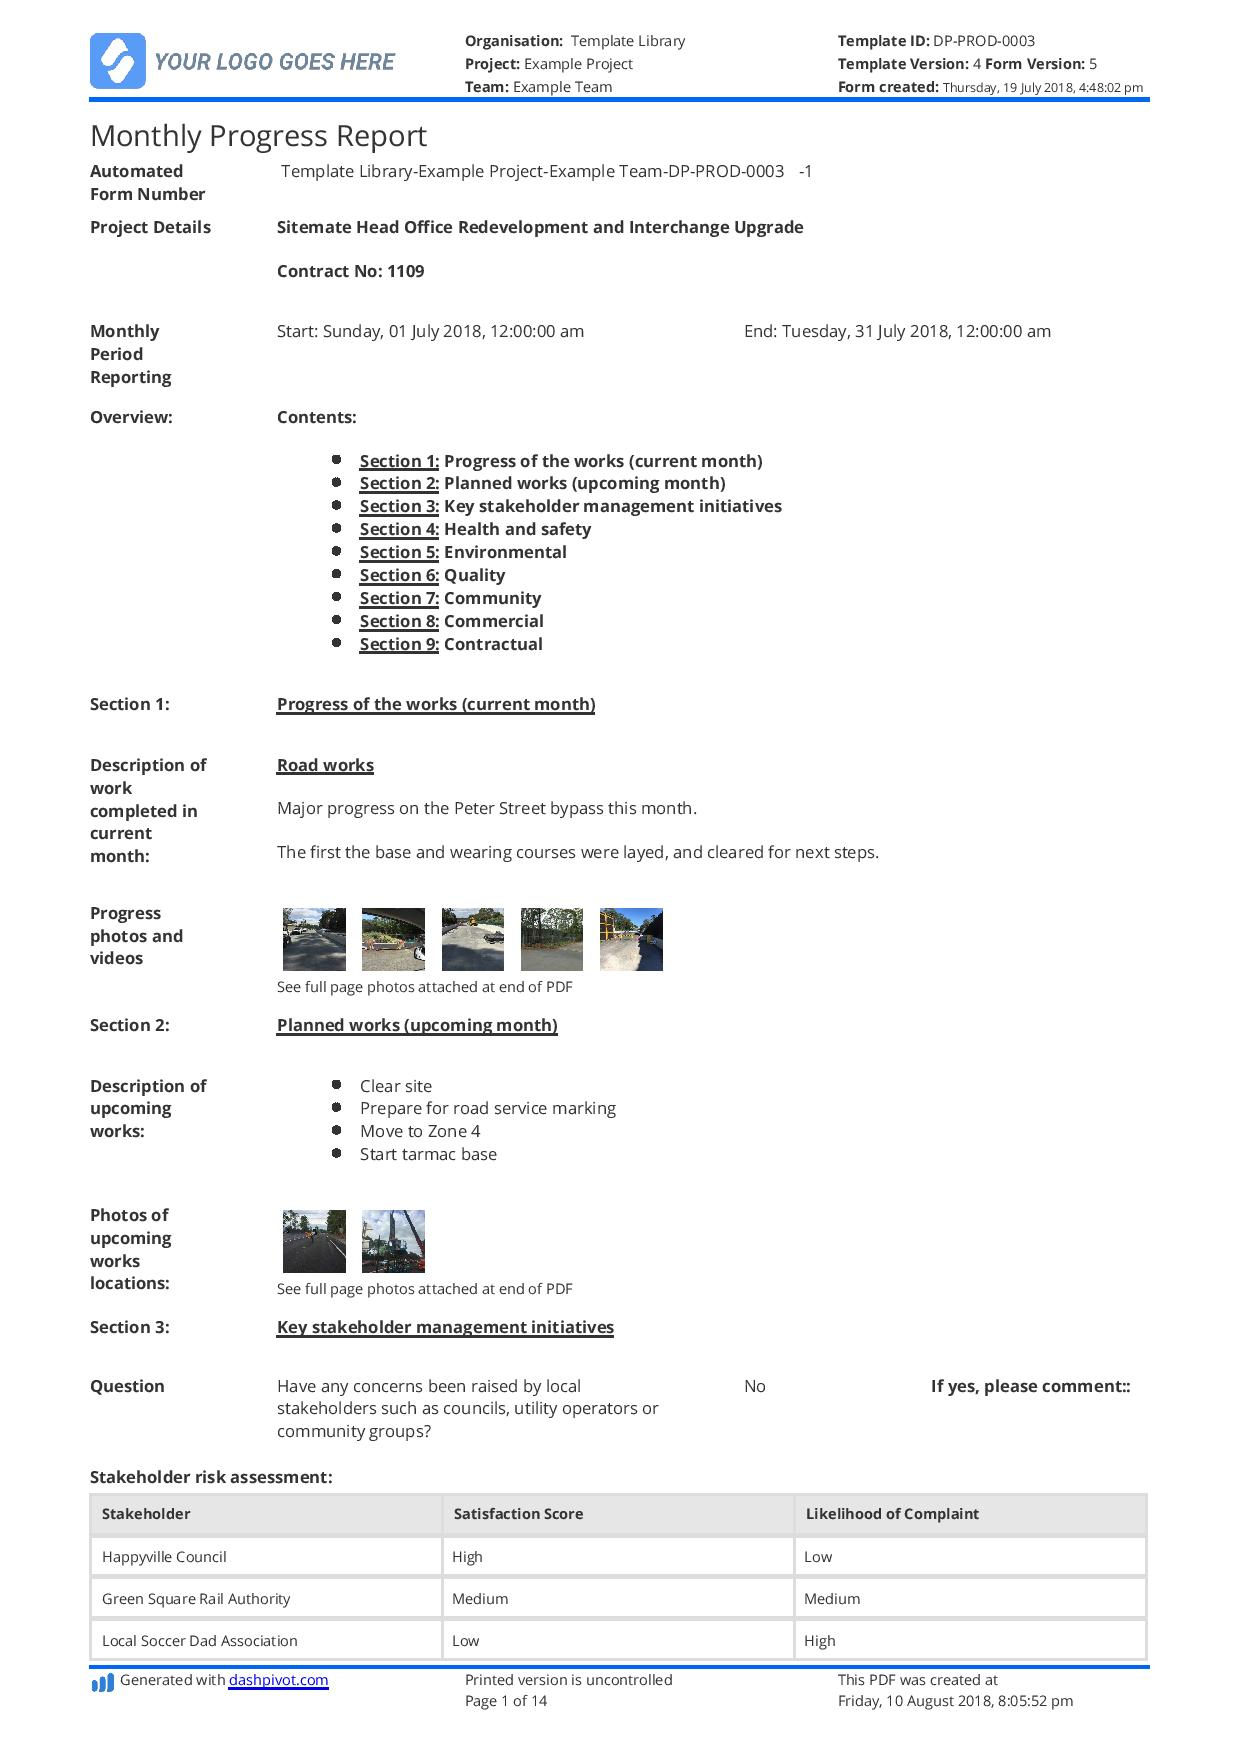 Monthly Construction Progress Report Template: Use This Pertaining To Monthly Productivity Report Template